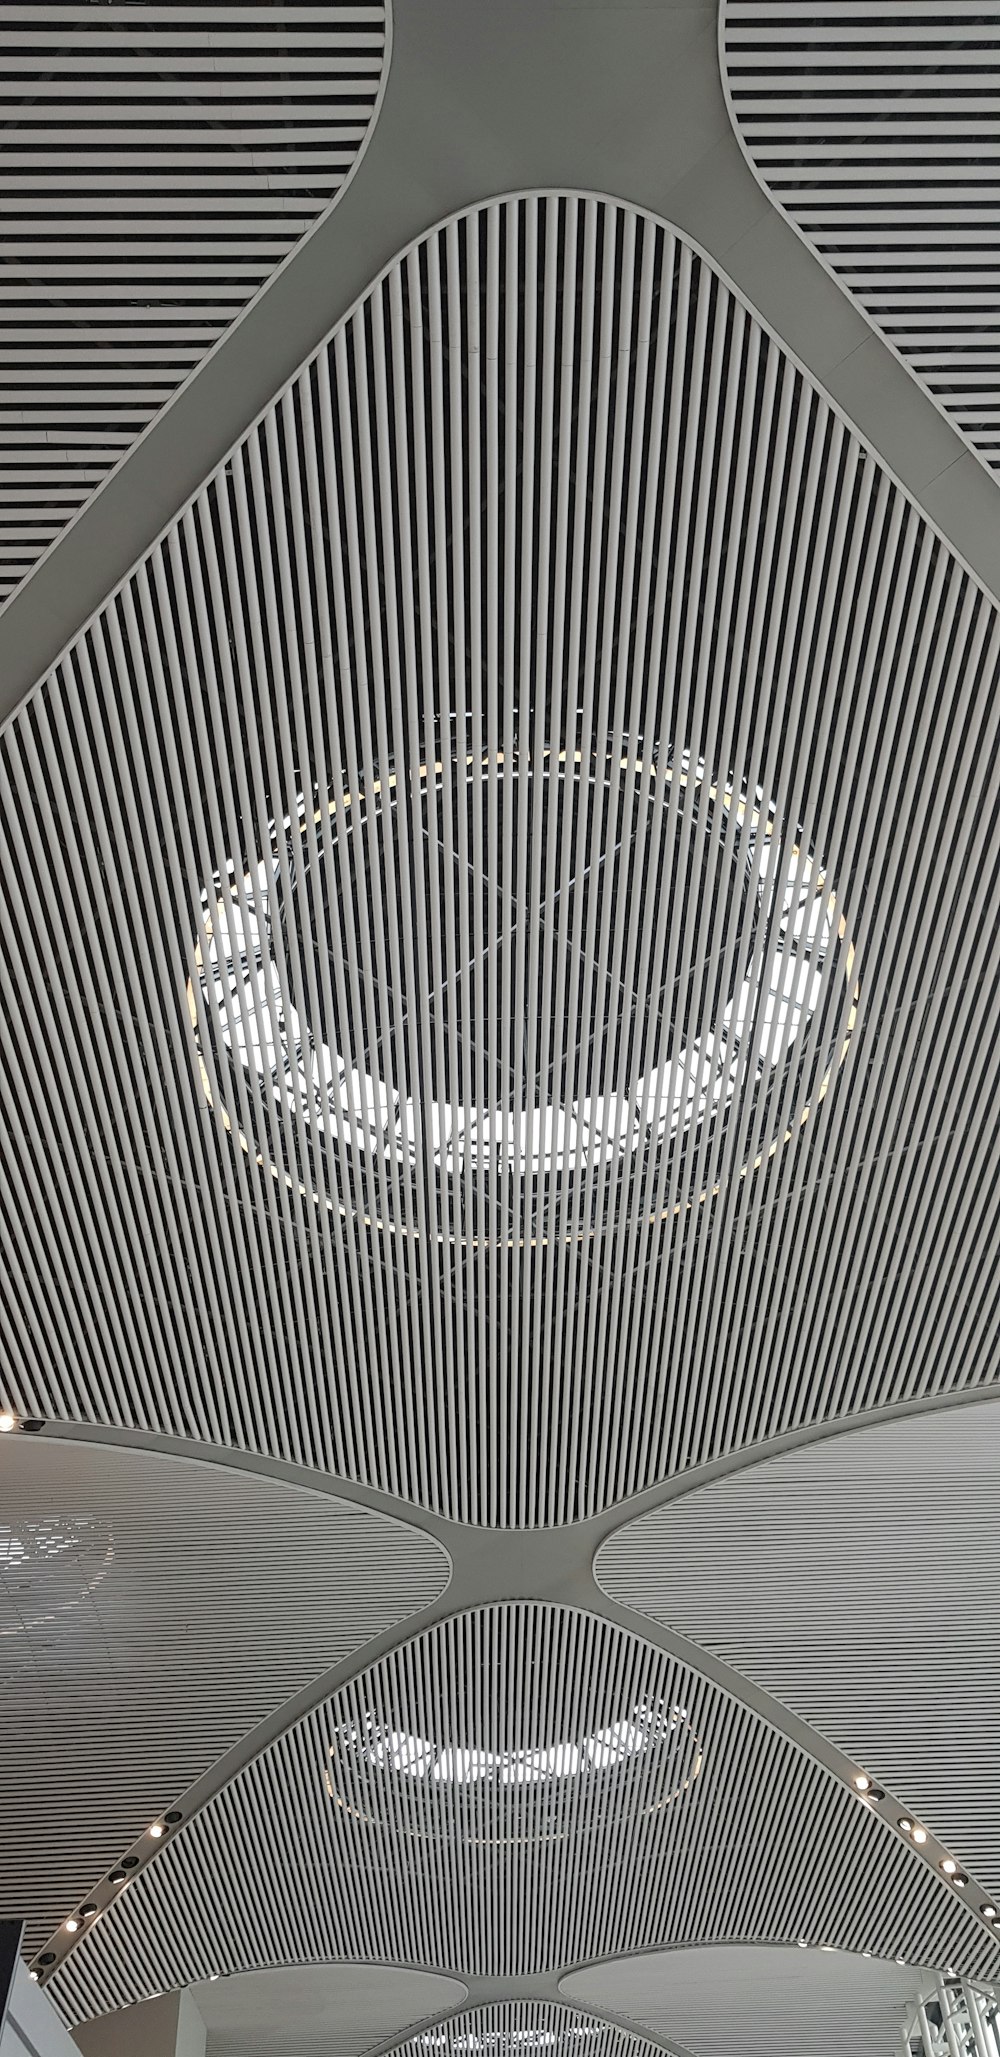 the ceiling of a building with a circular light fixture